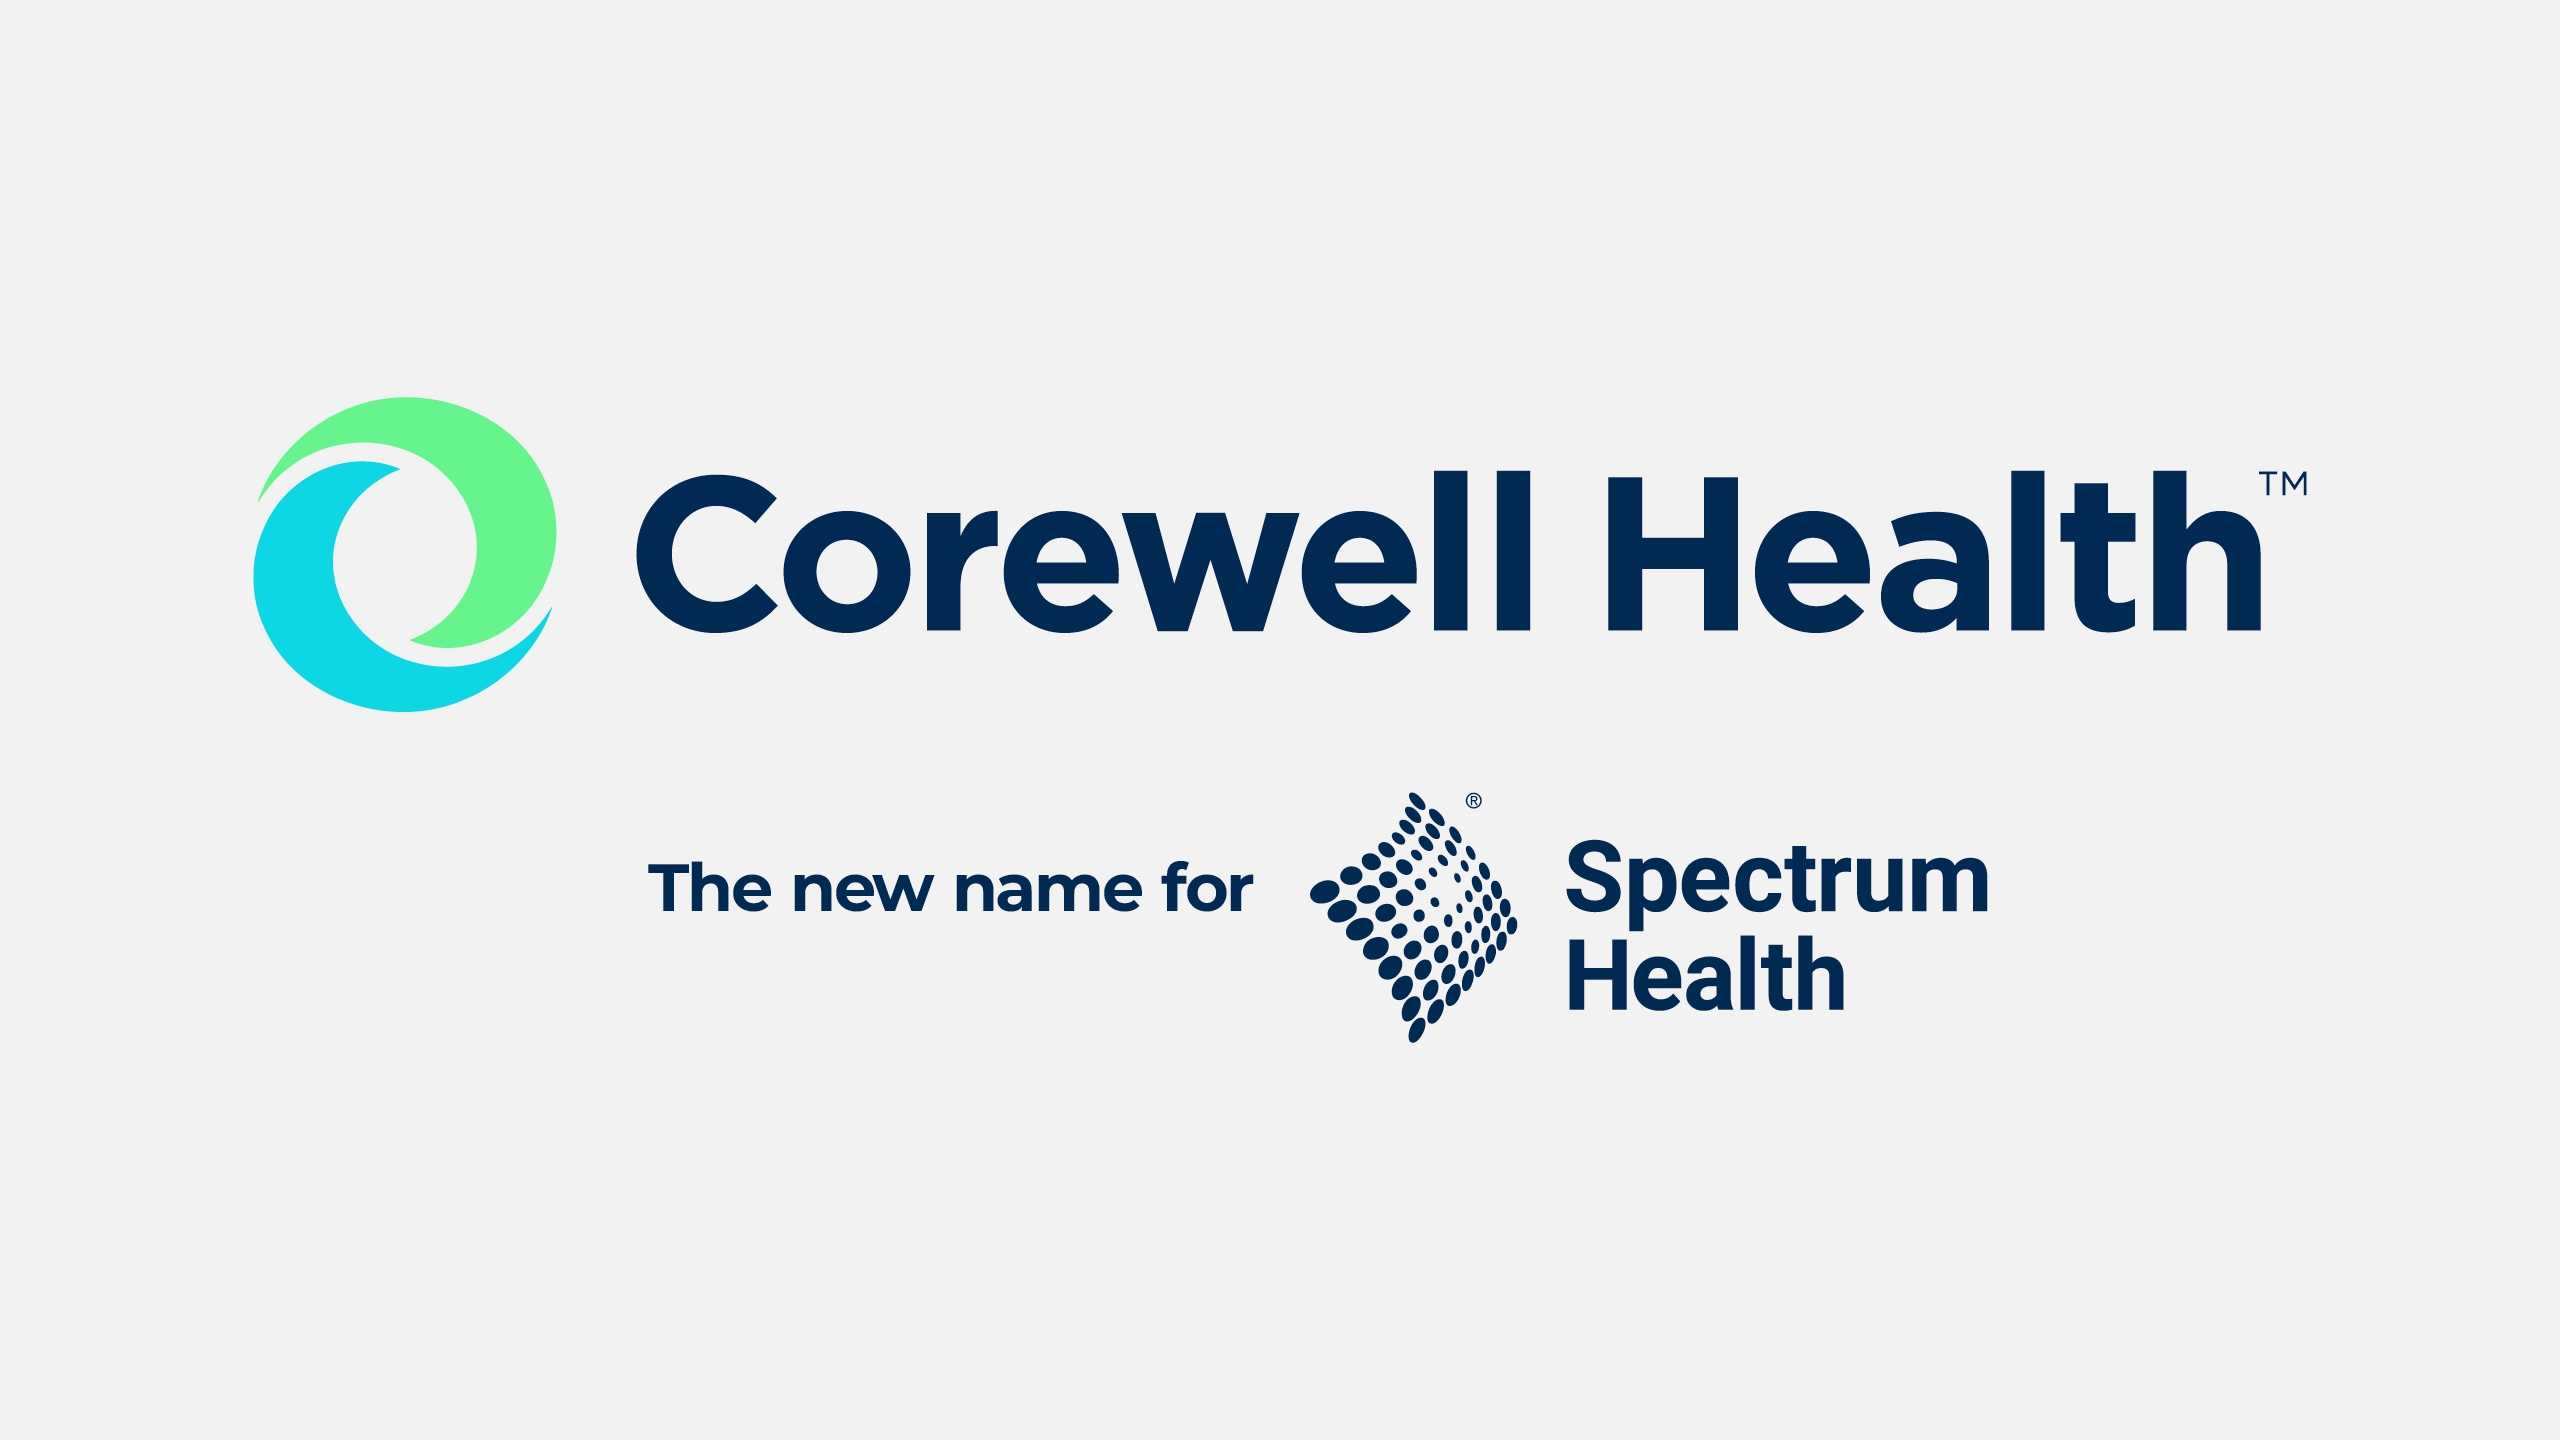 Corewell Health the new name for Spectrum Health